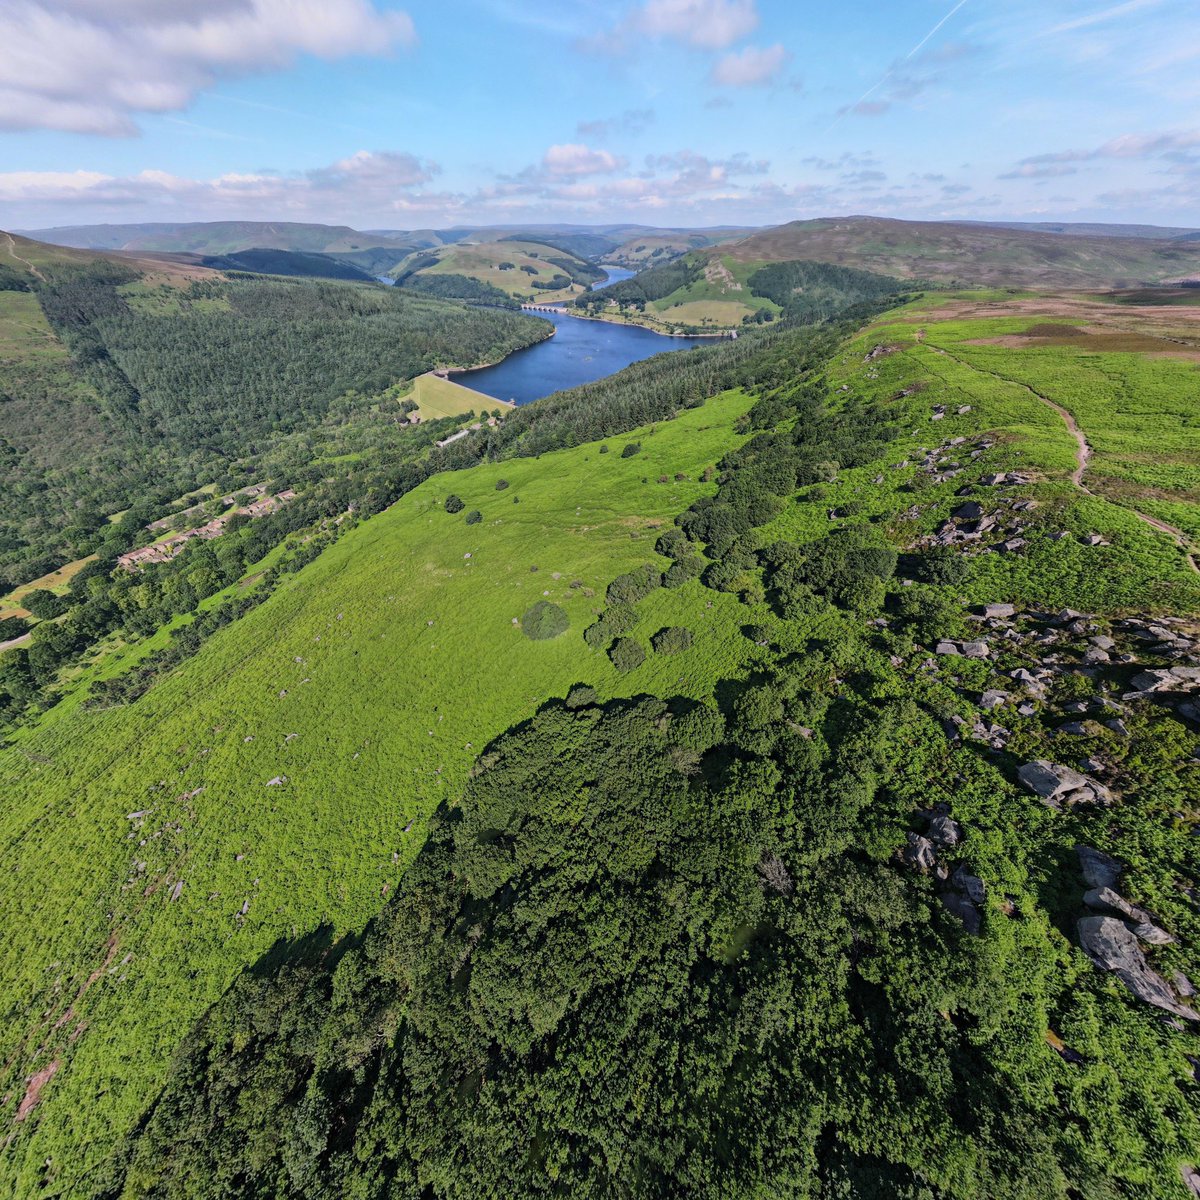 Another aerial view over Bamford Edge from yesterday #peakdistrict #bamfordedge #ladybower #drone